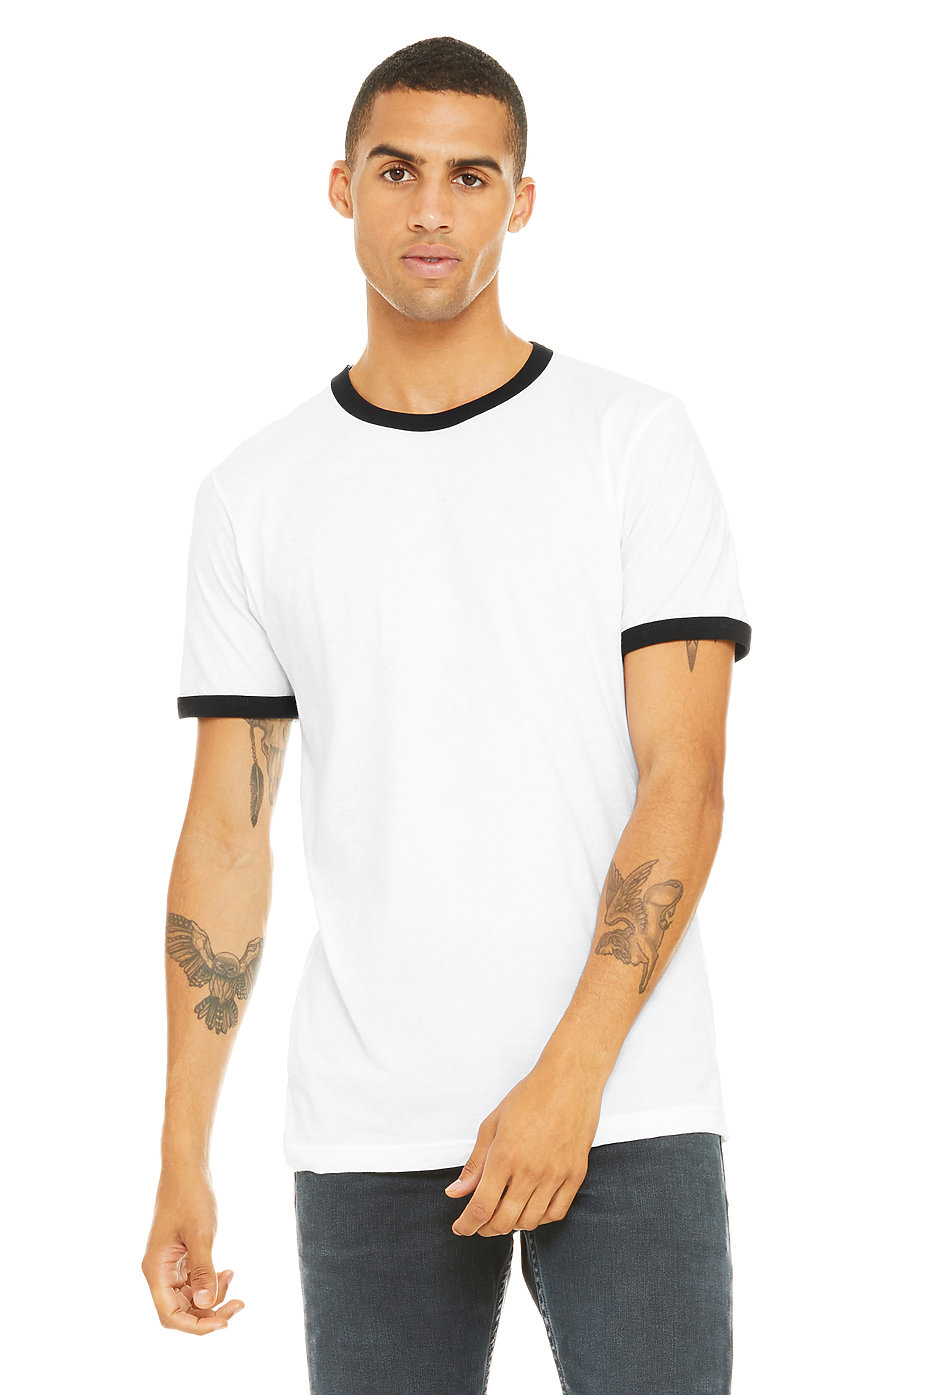 Ringer Tees | Wholesale Jersey T Shirts 